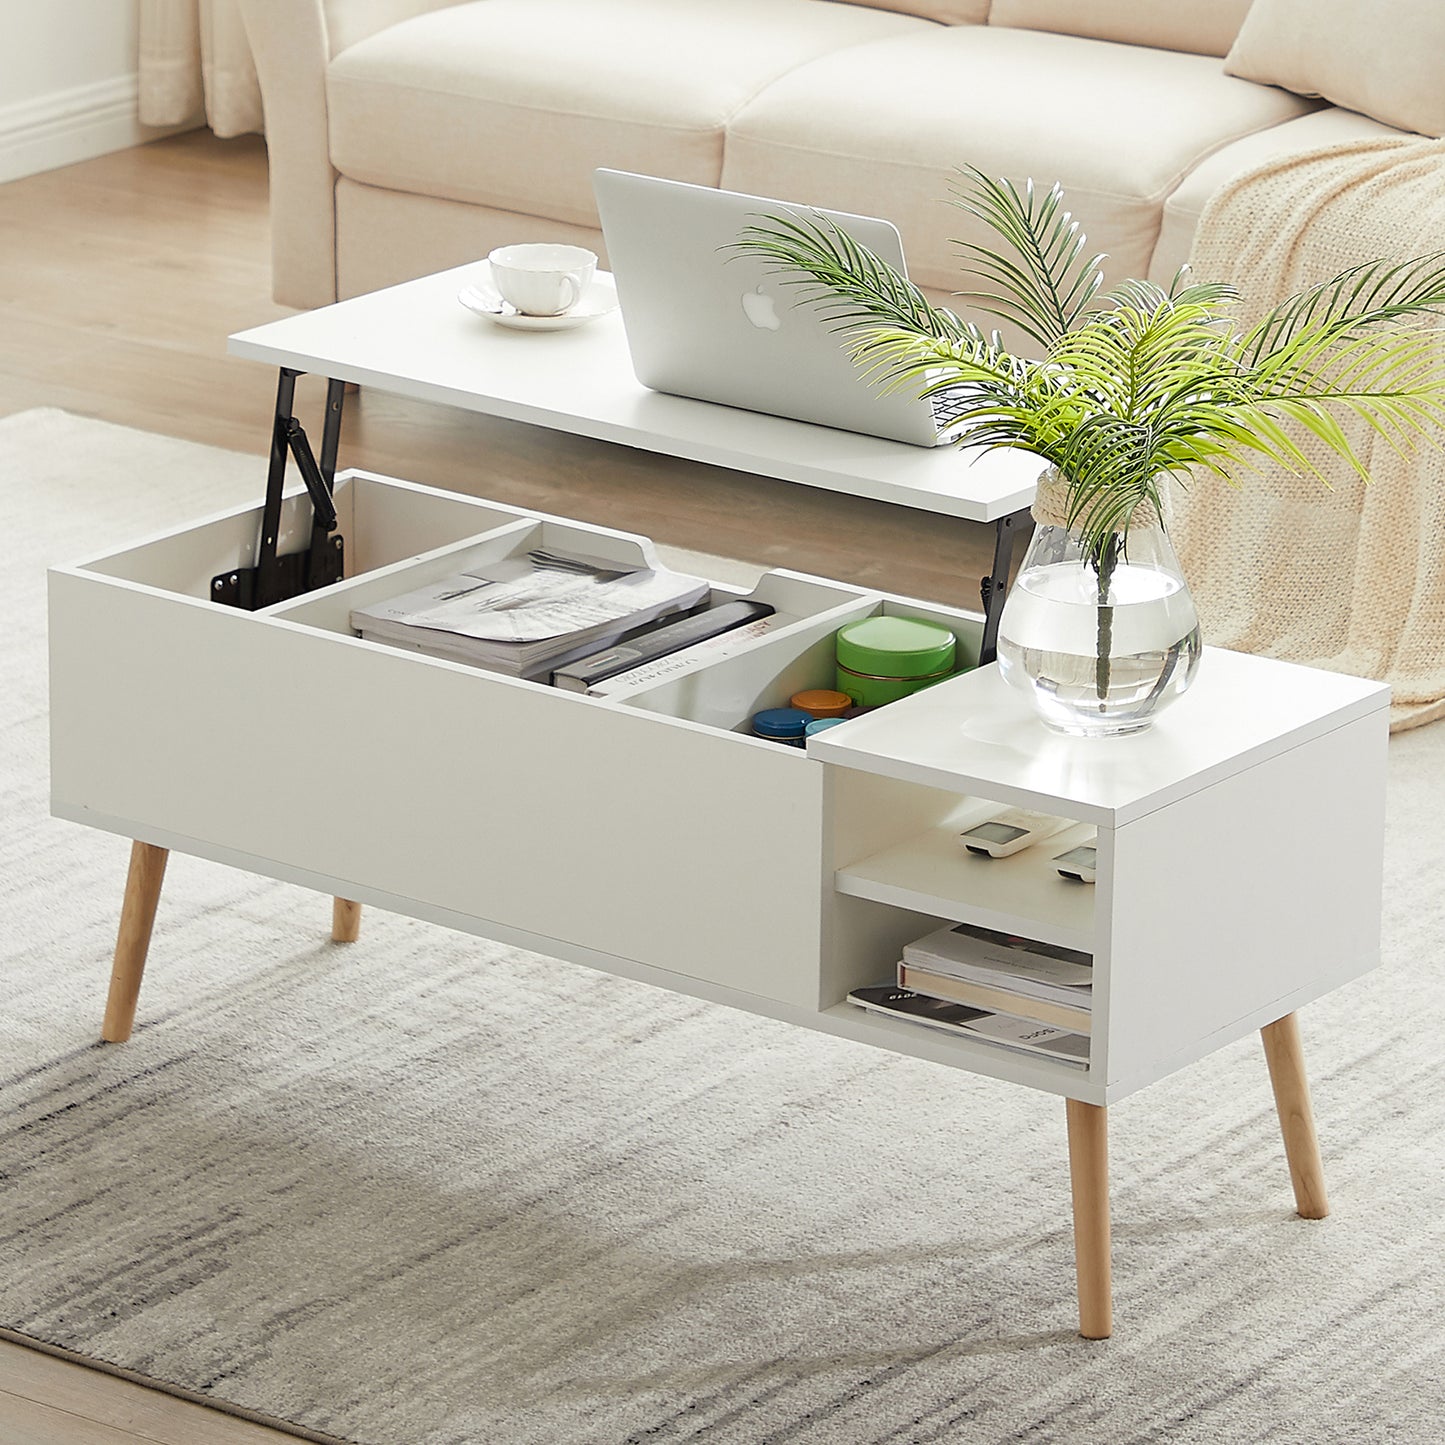 White Lift Top Coffee Tables for Living Room, Modern Coffee Table with Hidden Storage Compartment & Open Shelves, Dining Center Table Computer Desk Table for Office Reception Room